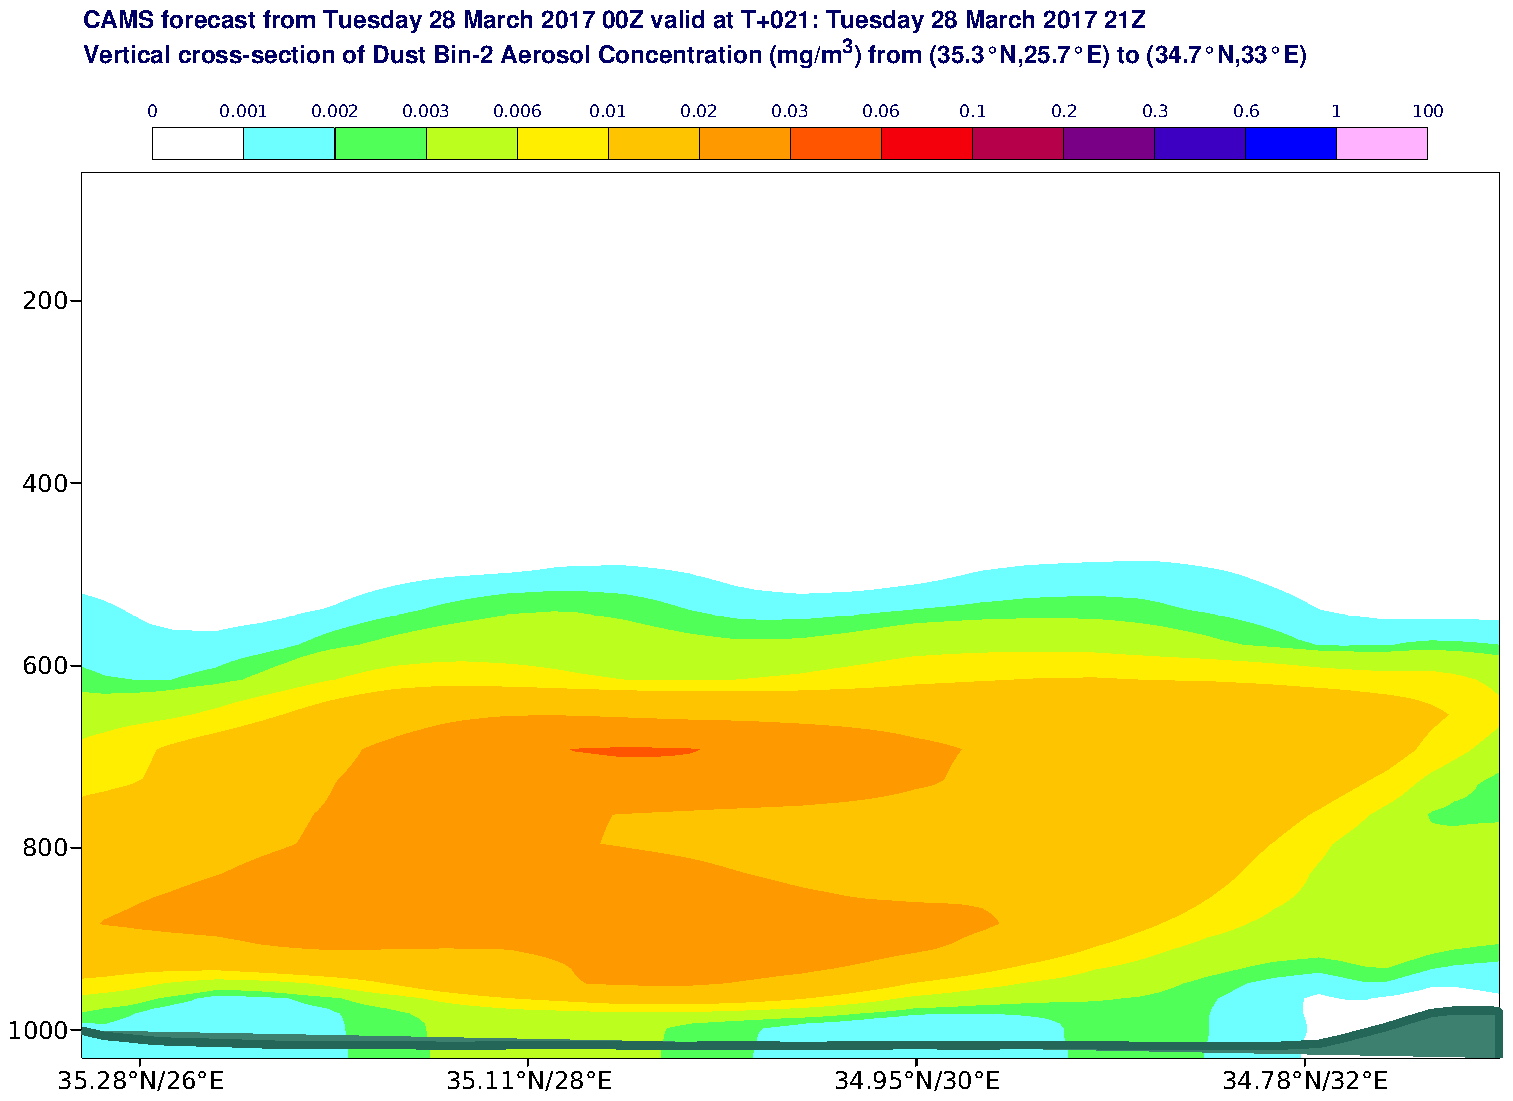 Vertical cross-section of Dust Bin-2 Aerosol Concentration (mg/m3) valid at T21 - 2017-03-28 21:00